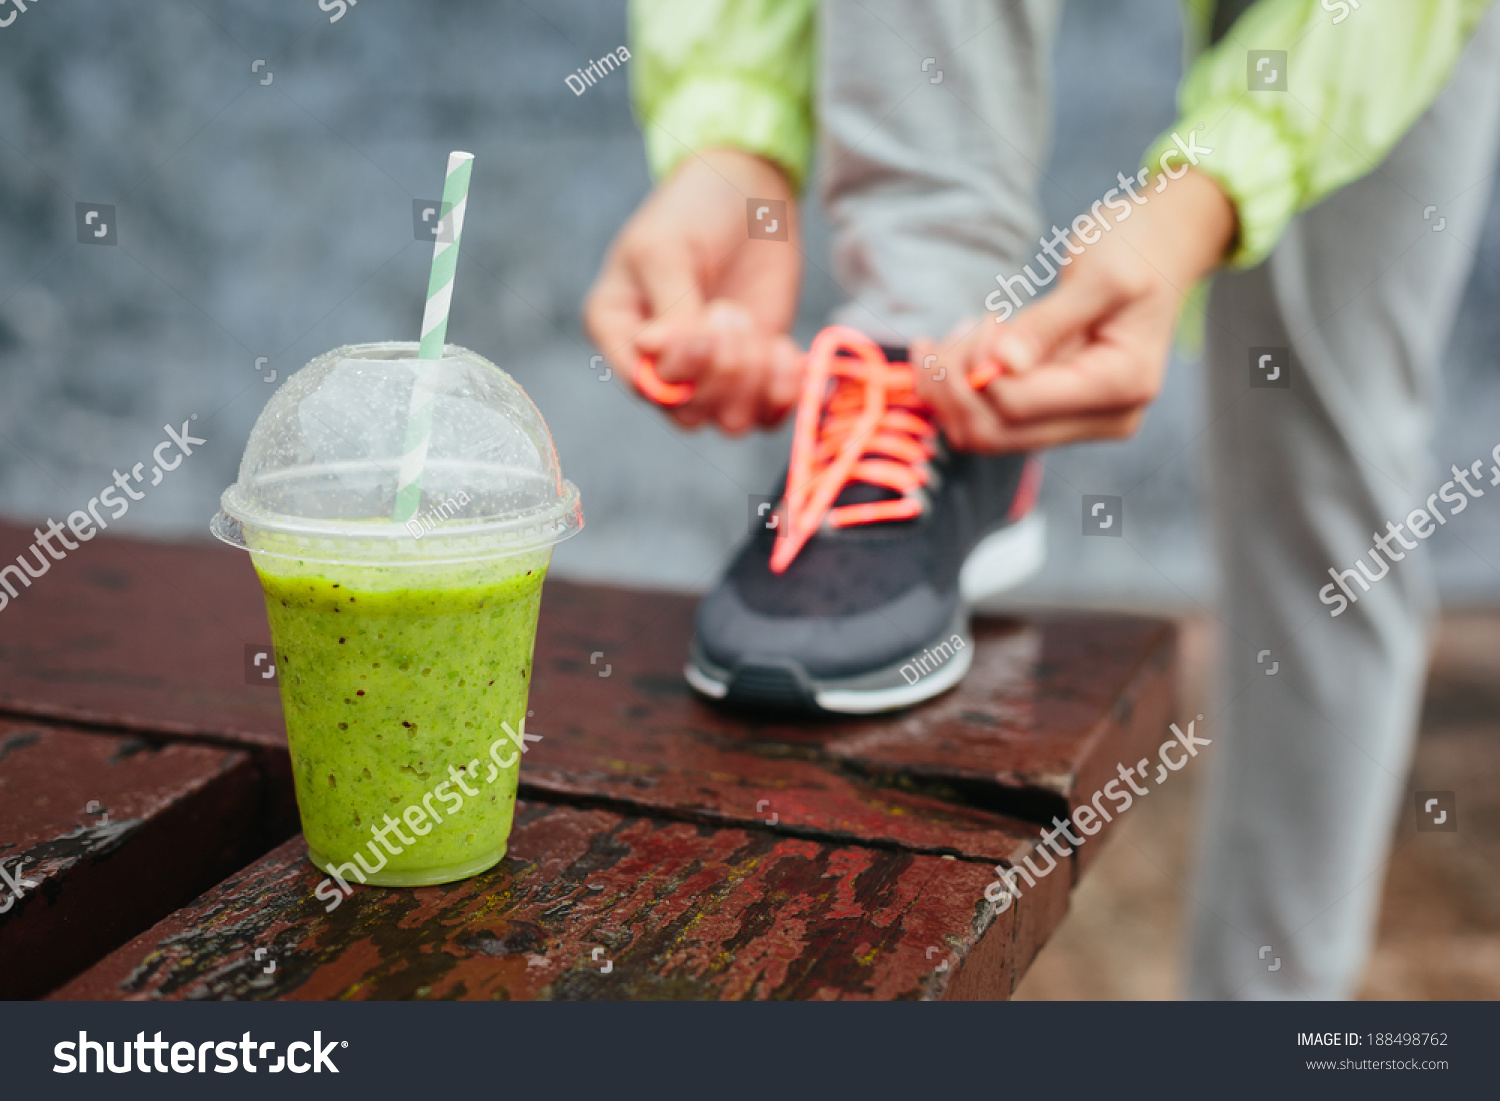 Green detox smoothie cup and woman lacing running shoes before workout on rainy day. Fitness and healthy lifestyle concept. #188498762